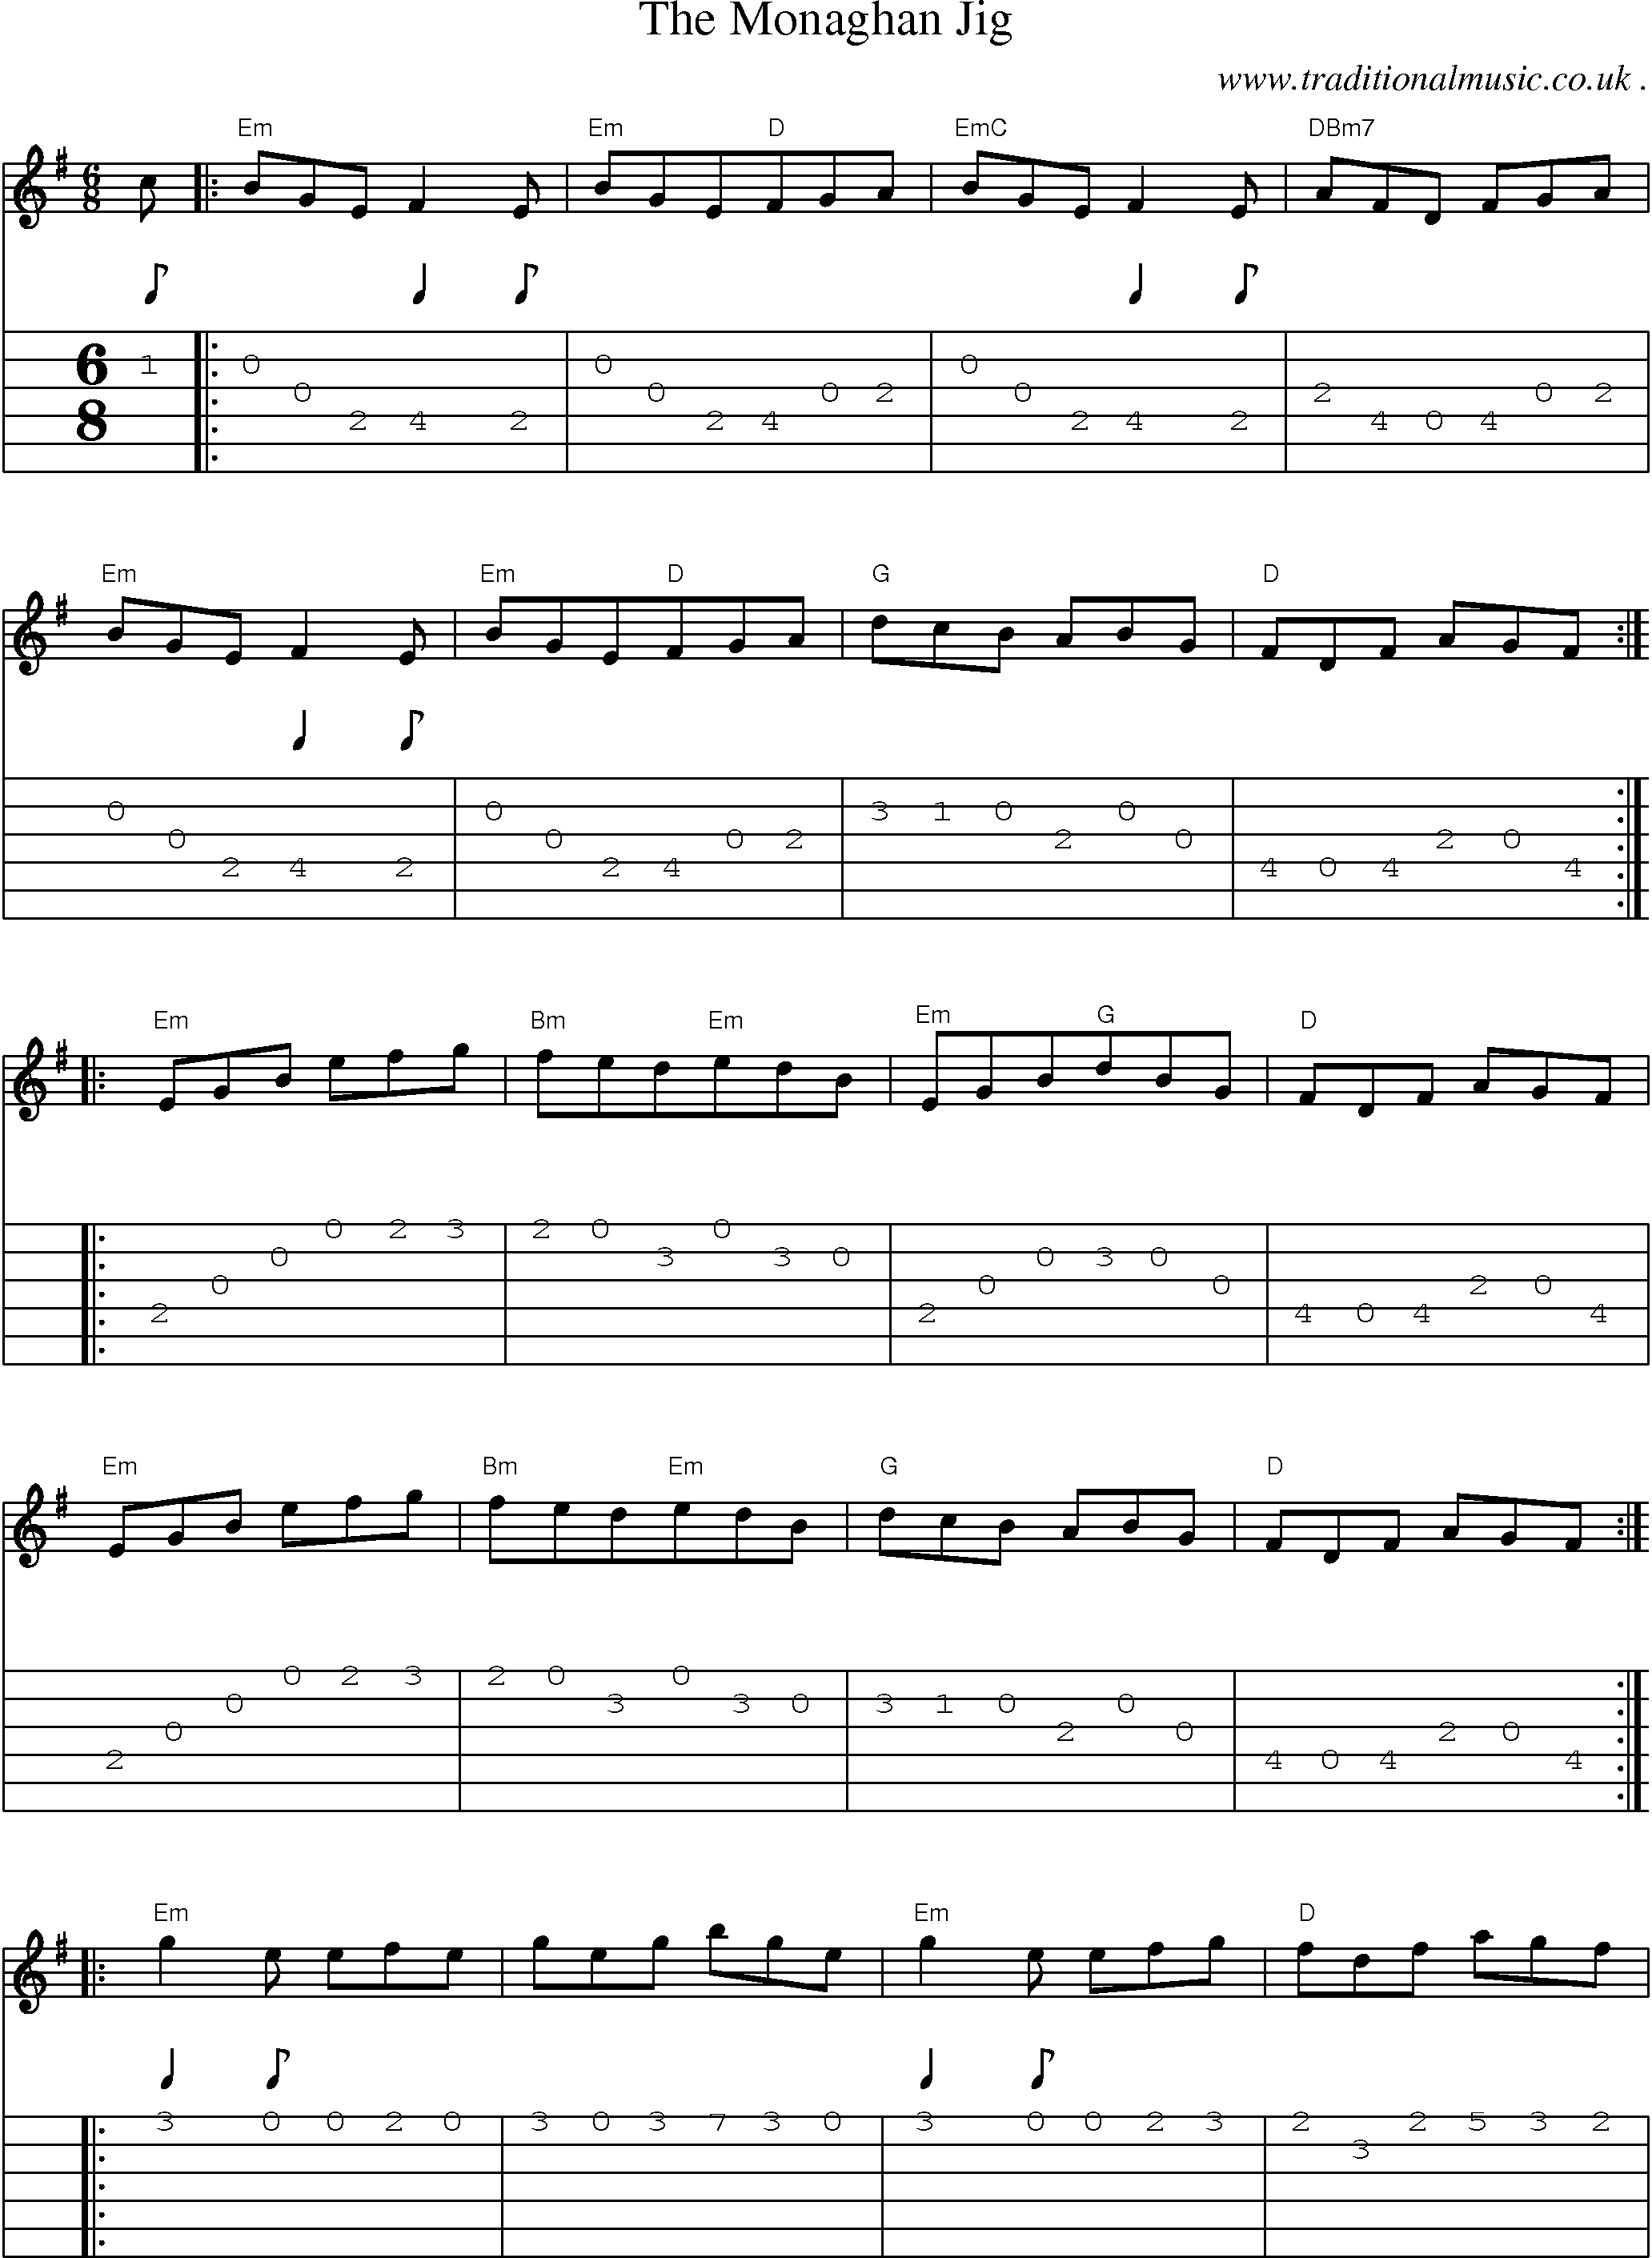 Sheet-Music and Guitar Tabs for The Monaghan Jig